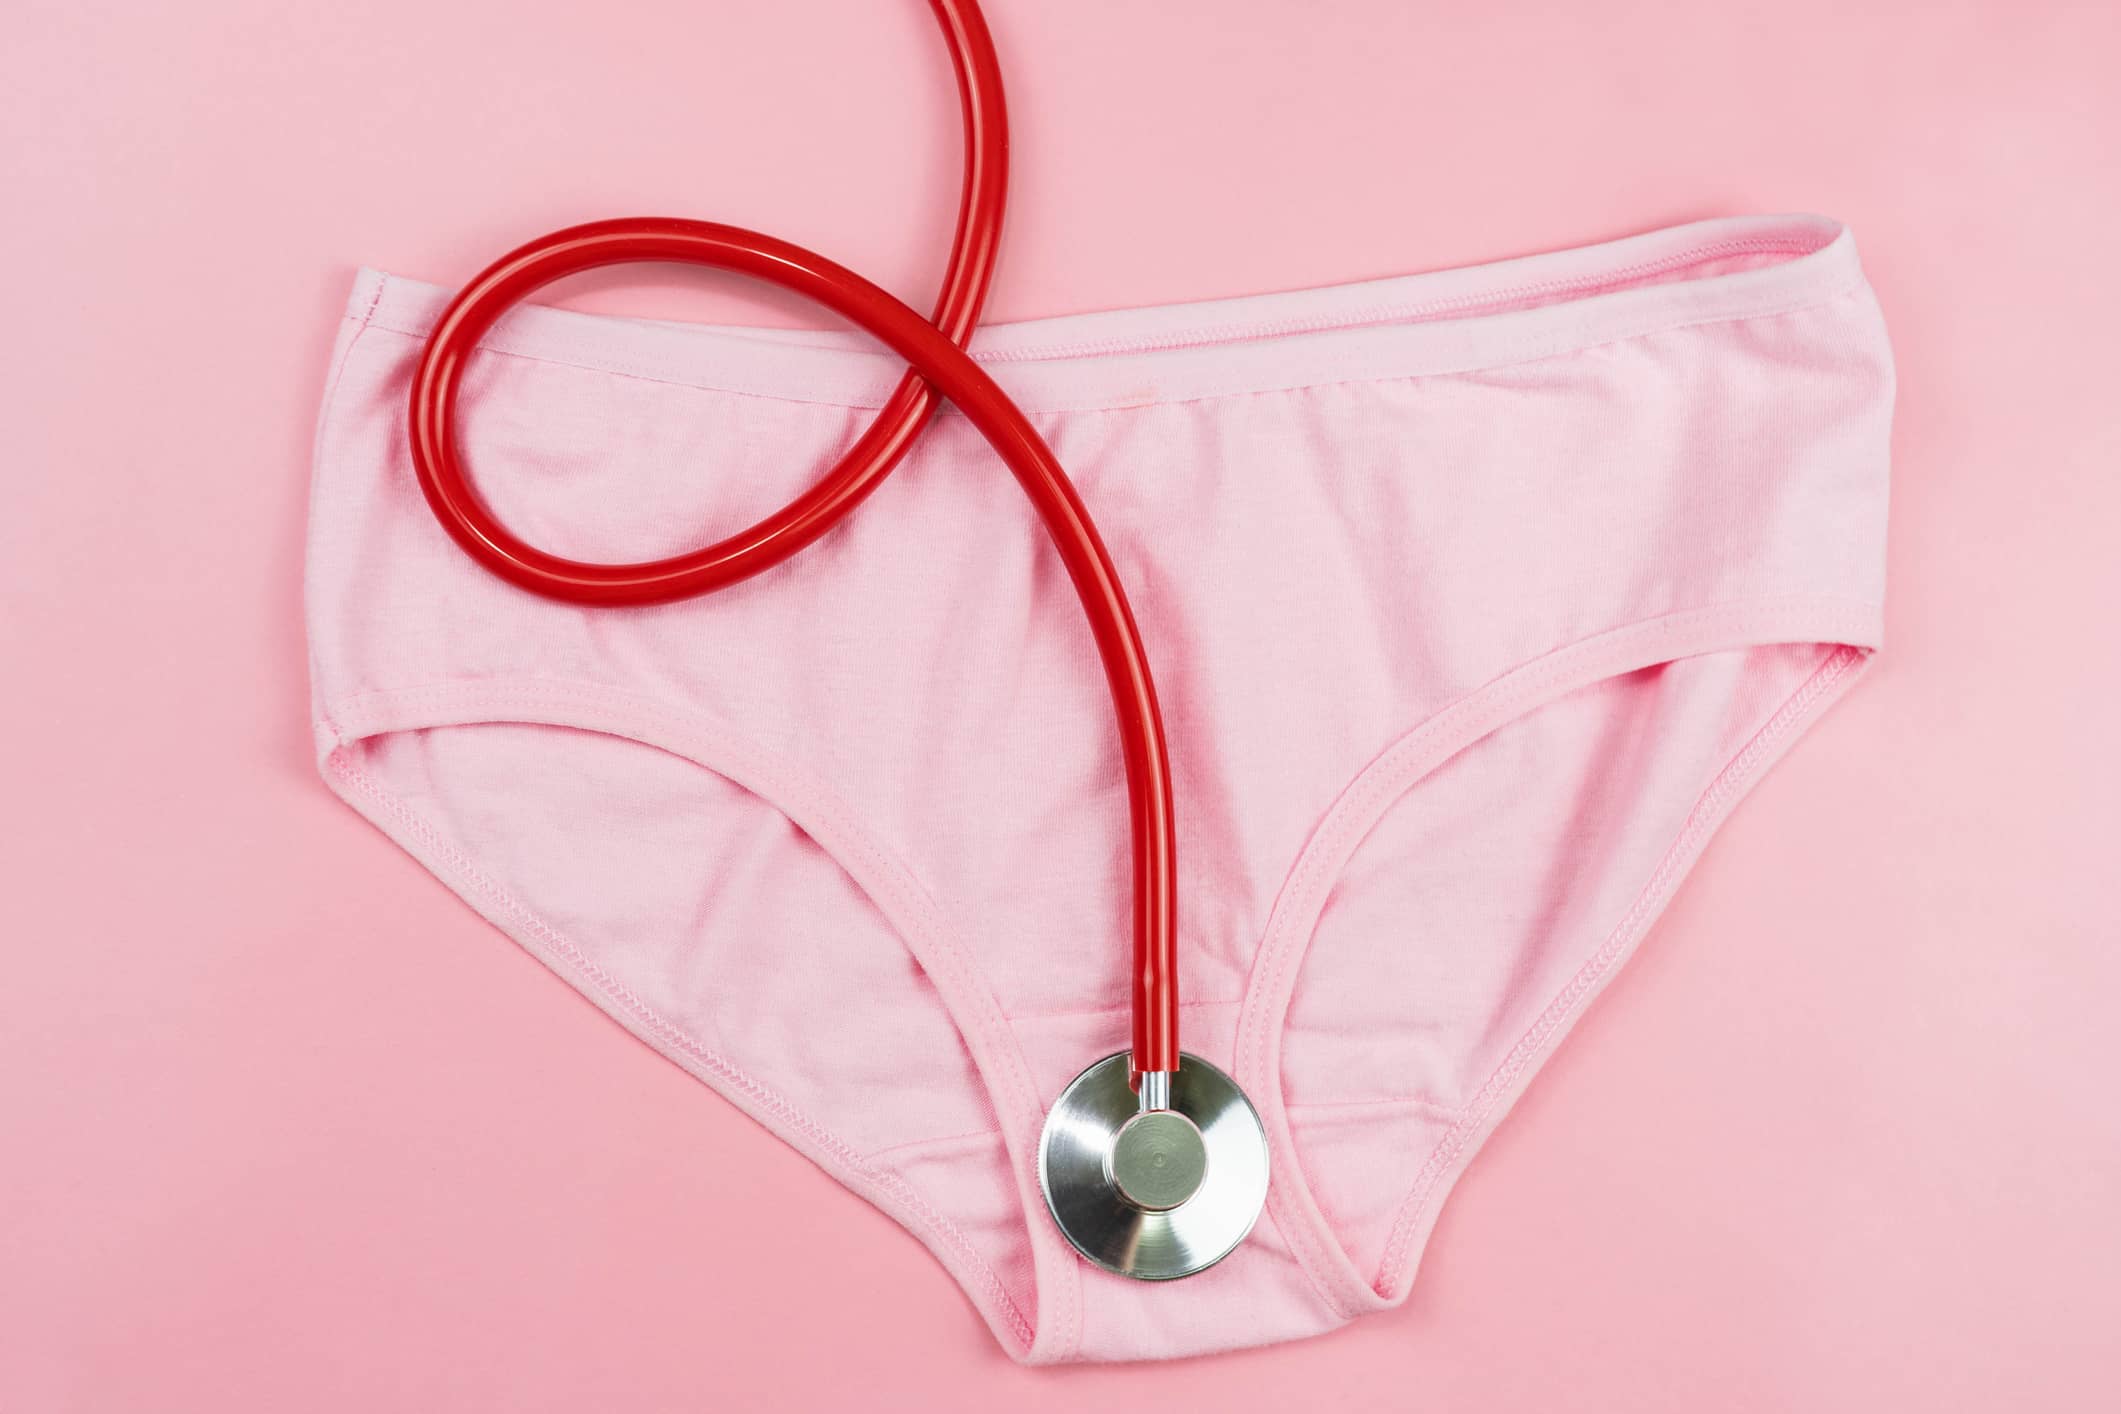 Is vaginal bleeding after sex normal? 